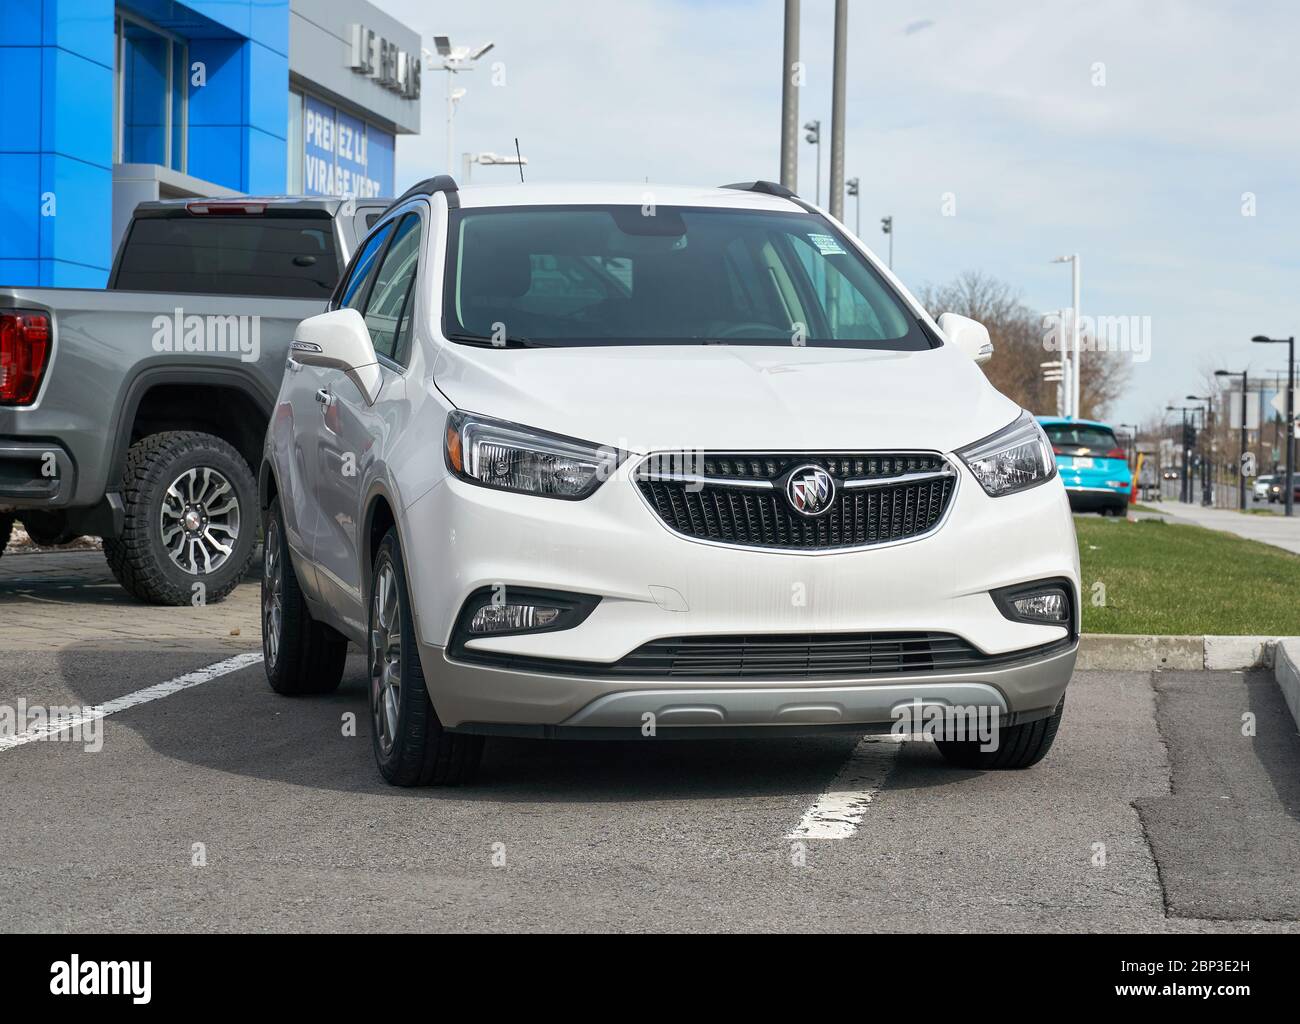 Montreal, Canada - May 2, 2020: Buick Encore 2020 car. Buick is a division of the American automobile manufacturer General Motors. Buick is positioned Stock Photo